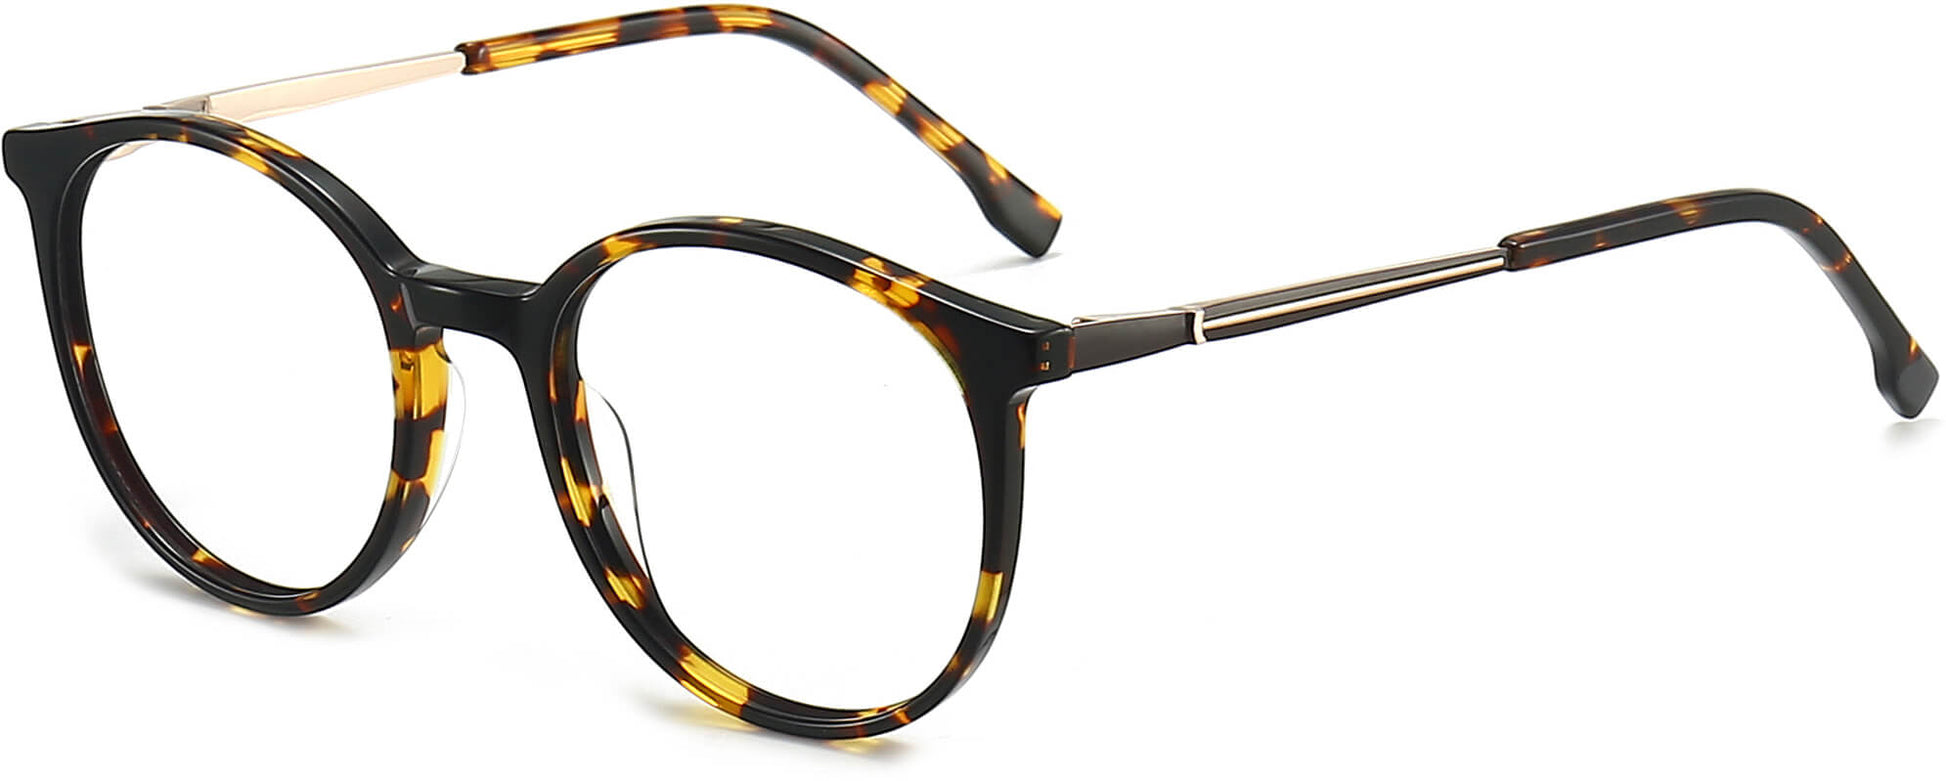 Oaklee Round Tortoise Eyeglasses from ANRRI, angle view